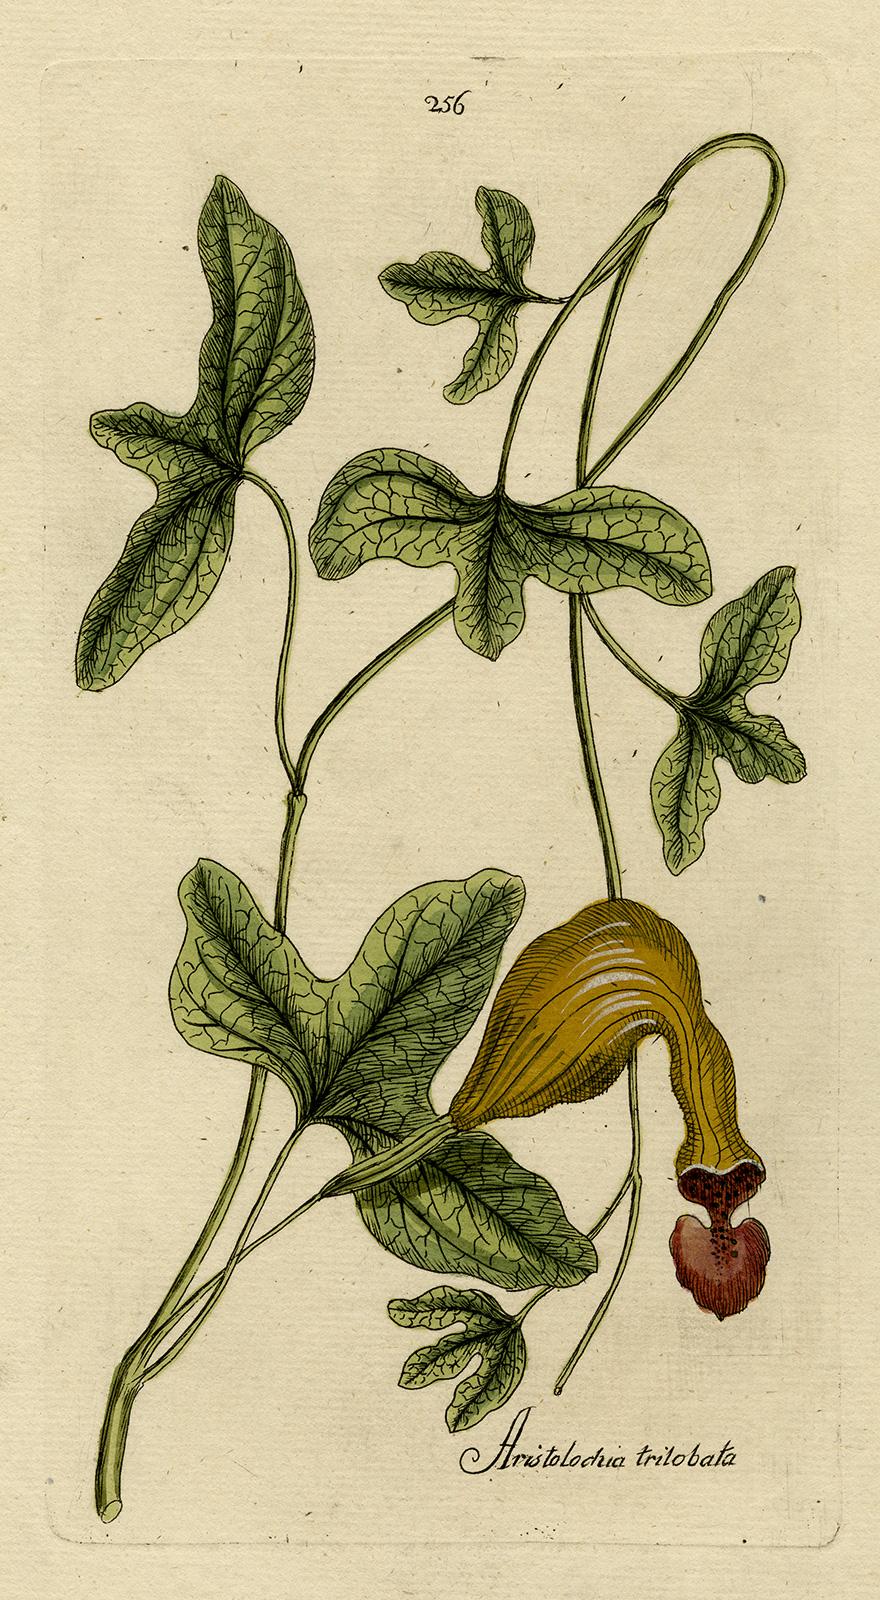 Andreas Friedrich Happe Still-Life Print - Dutchman's Pipe from Medicinal Plants by Happe - Handcoloured engraving - 18th c